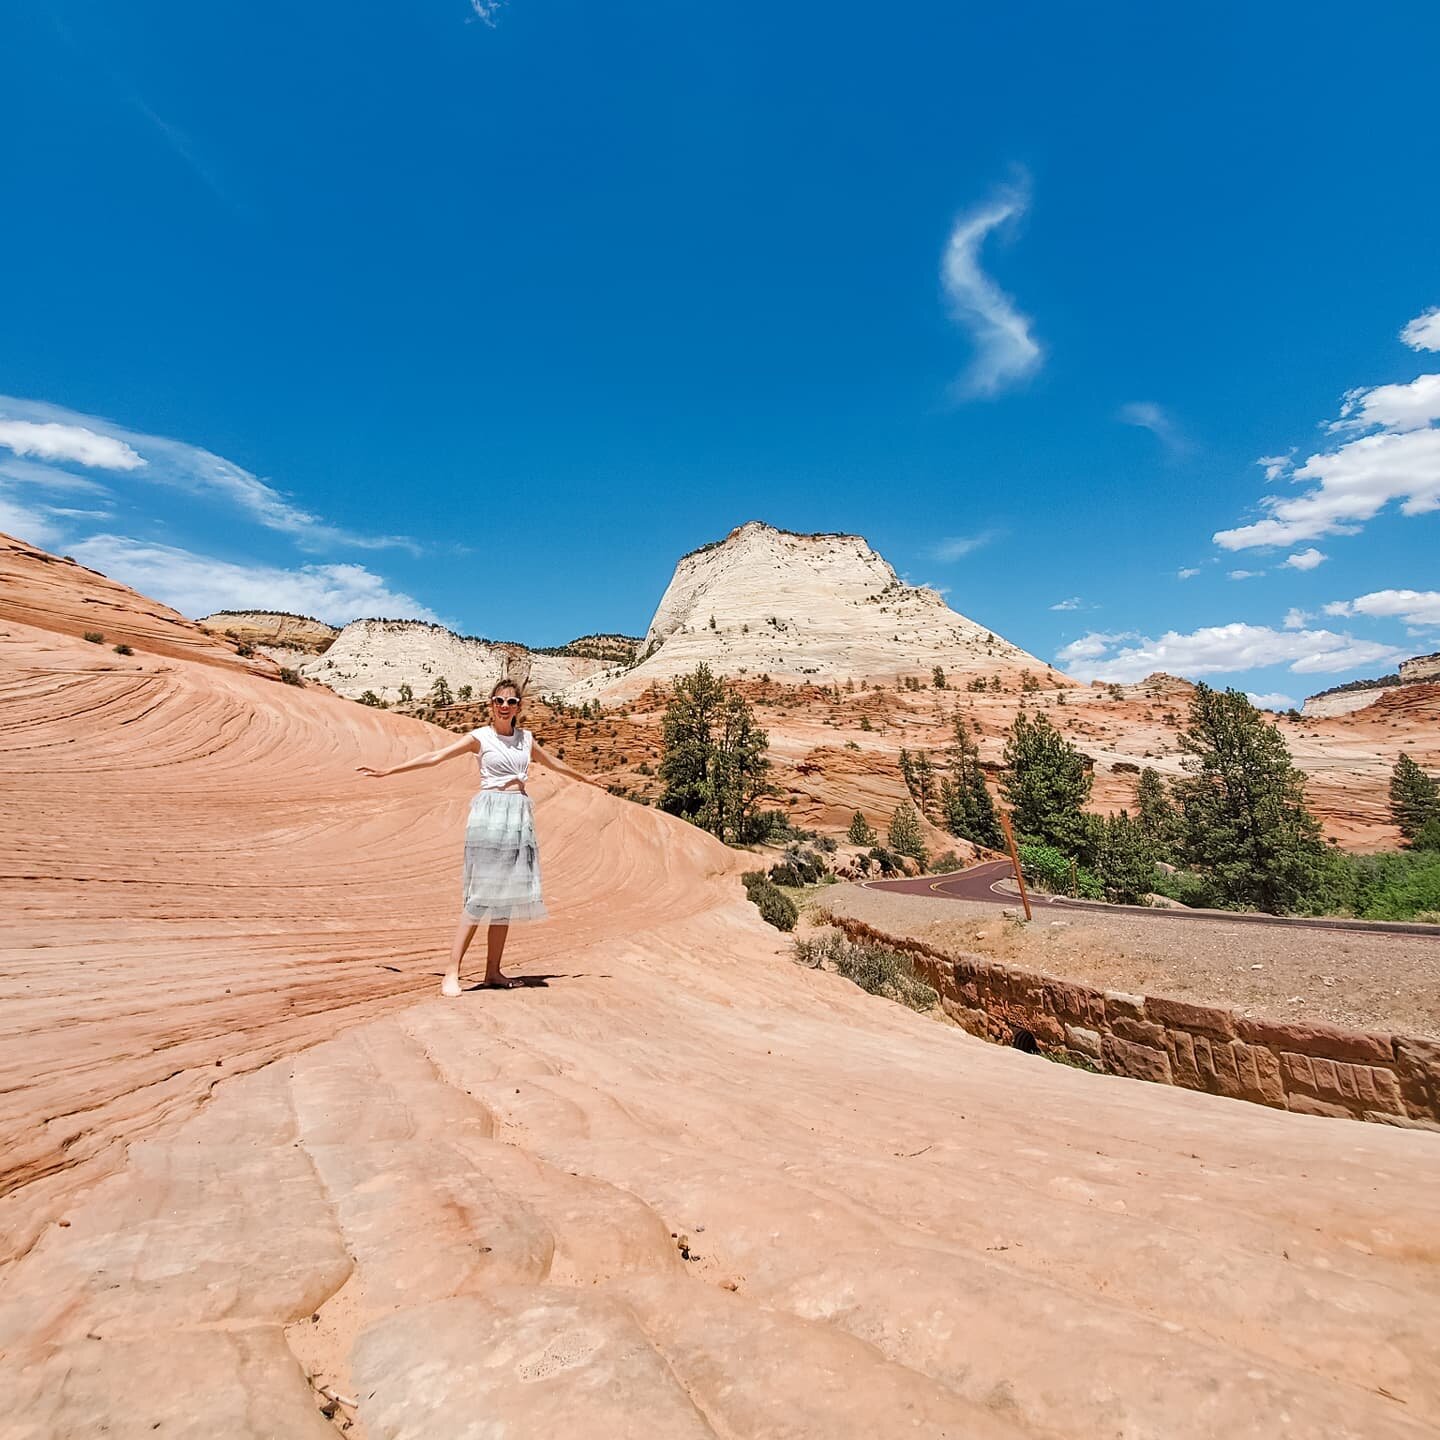 **Save for visiting Zion National Park**

Zion is notorious for the Angel&rsquo;s Landing and The Narrows hikes, so if you're looking for some OTHER things to do, save this list.

Best Things To Do in @zionnps
1. Drive the Zion-Mount Carmel Highway
2